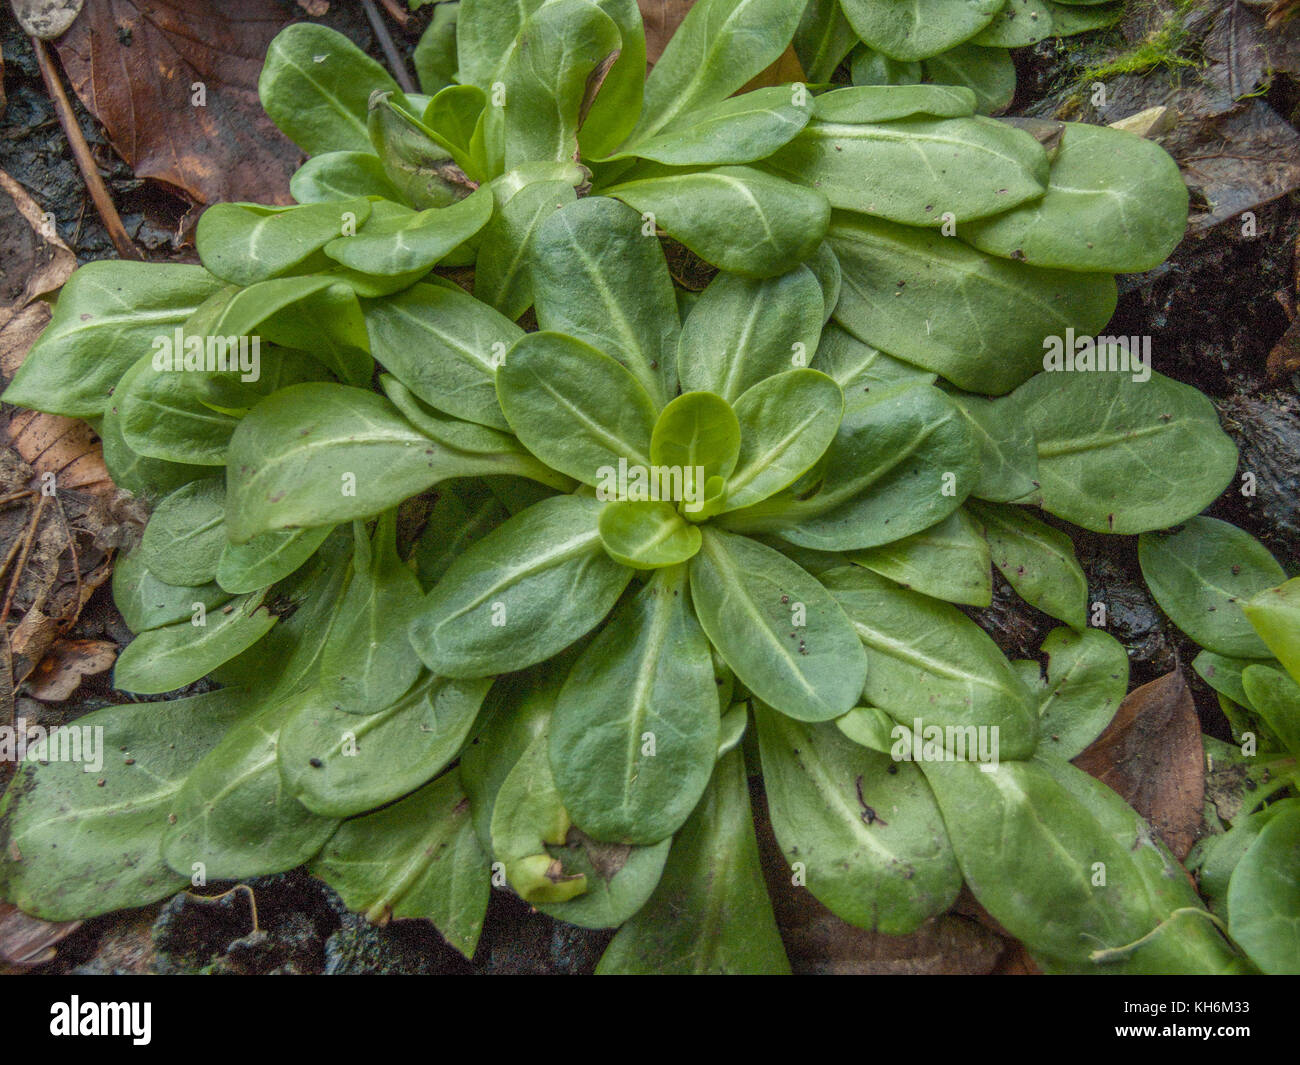 Young foliage of Brookweed / Samolus valerandi growing in soggy wet gound. Mature plant has small white flowers with 5 petals. Edible foraged plant. Stock Photo